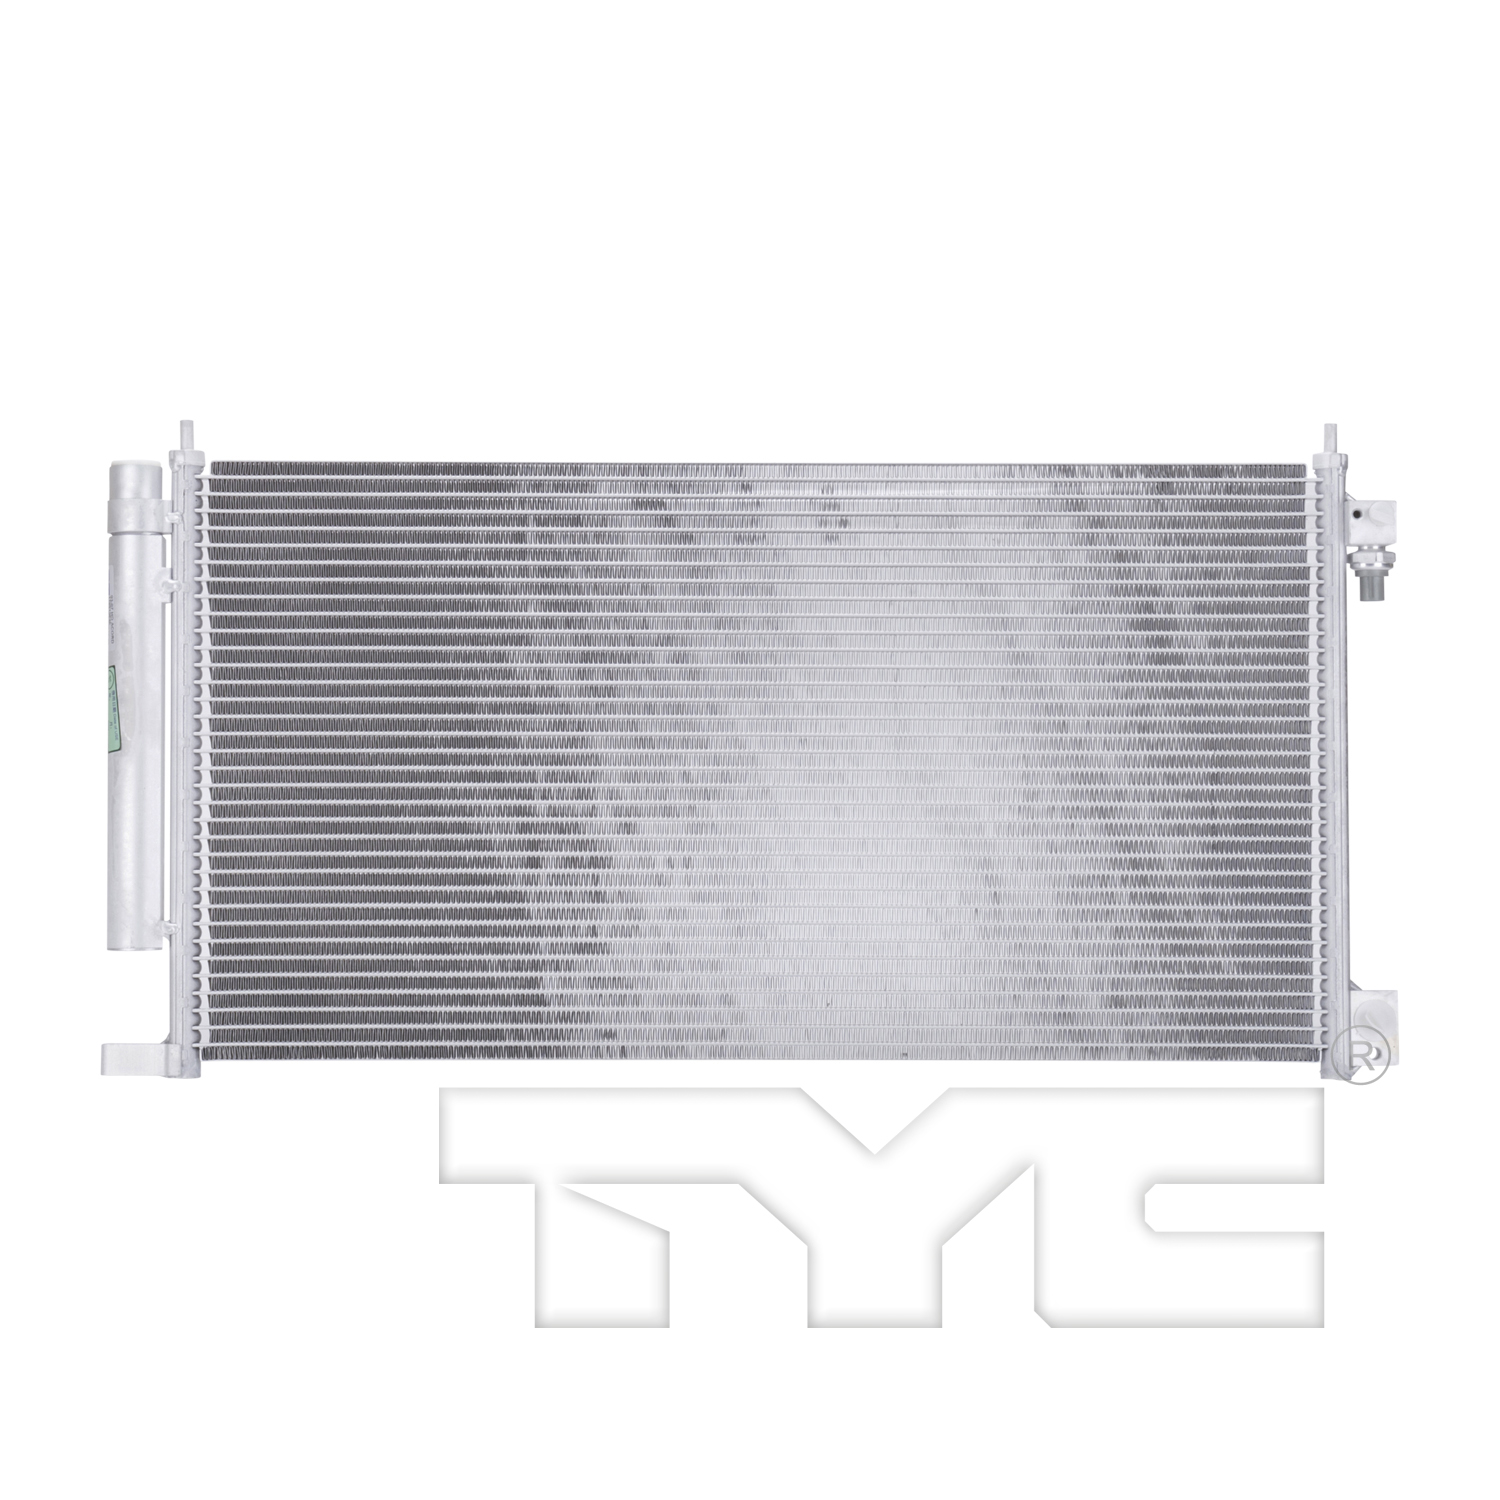 Aftermarket AC CONDENSERS for HONDA - ACCORD, ACCORD,03-07,Air conditioning condenser